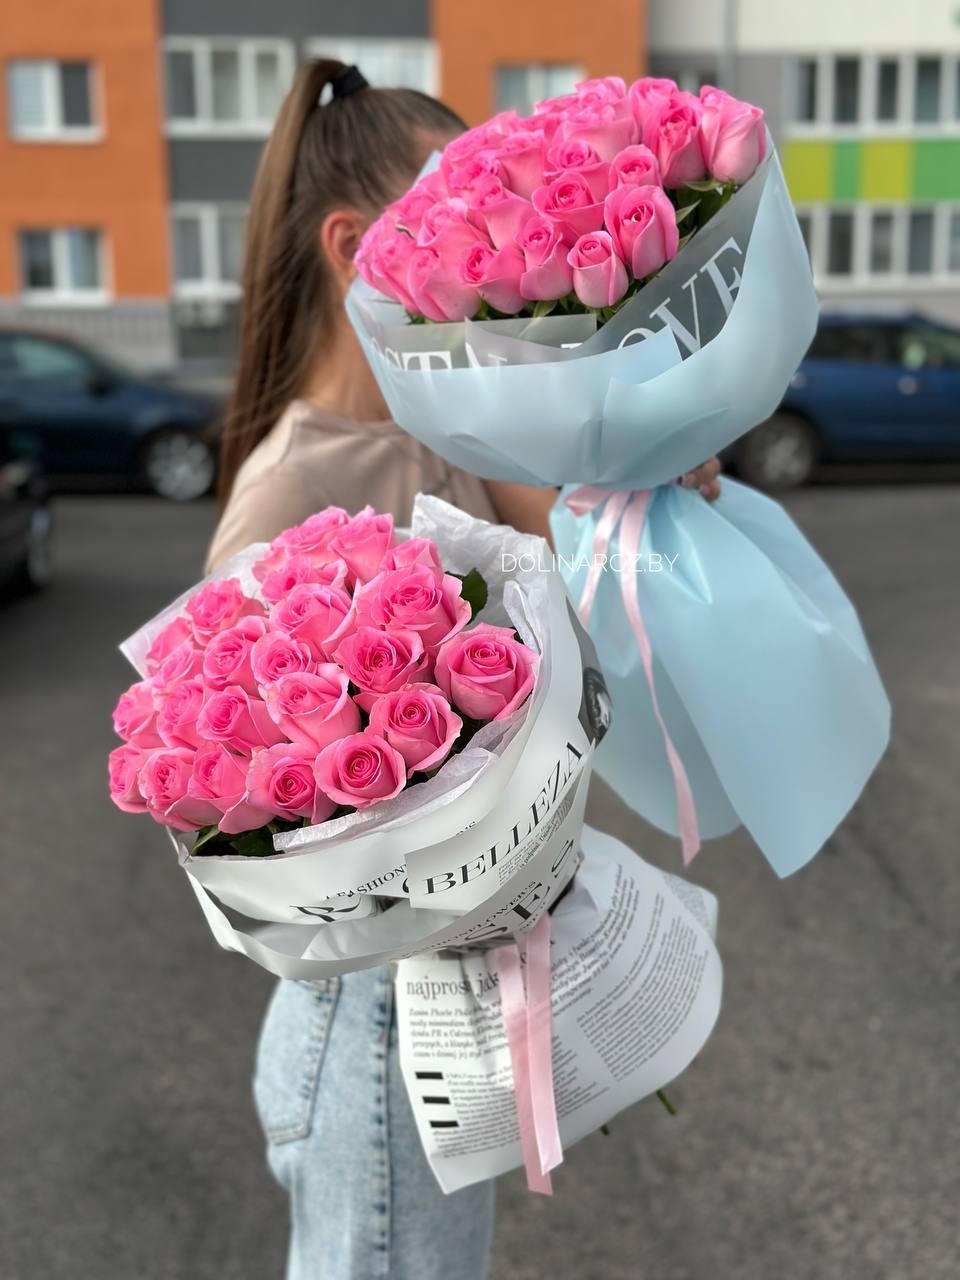 Bouquet of roses "Cindy"